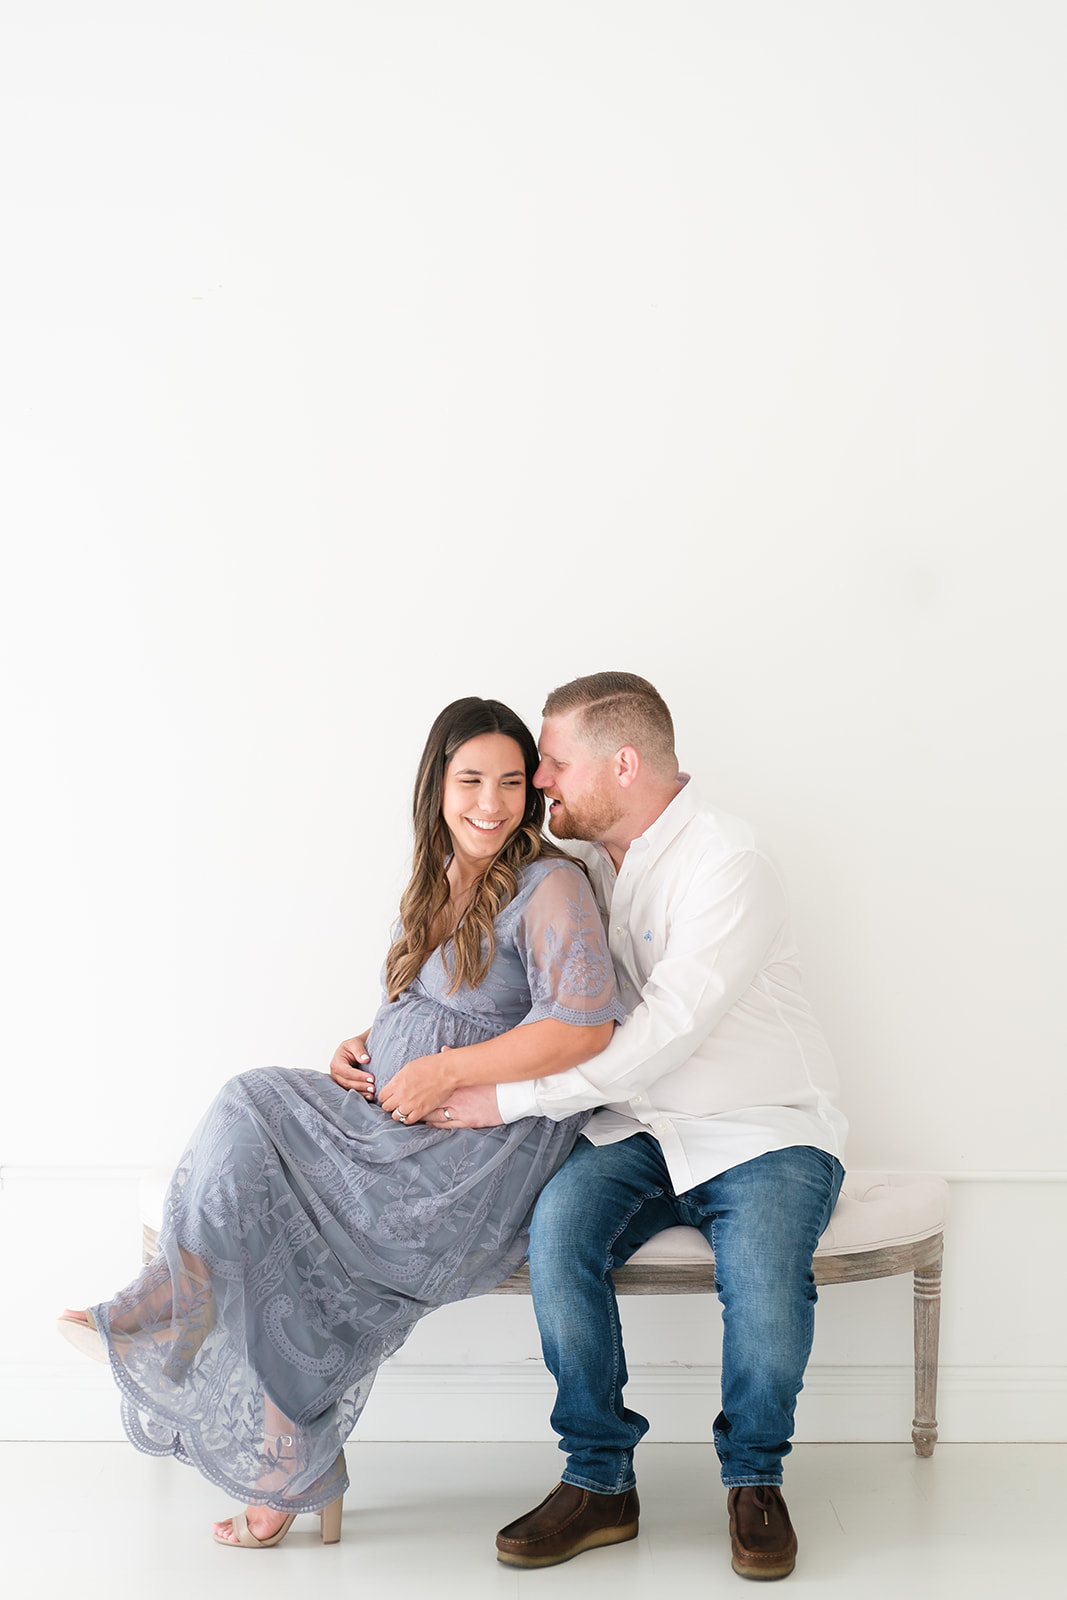 South Tampa maternity session in studio